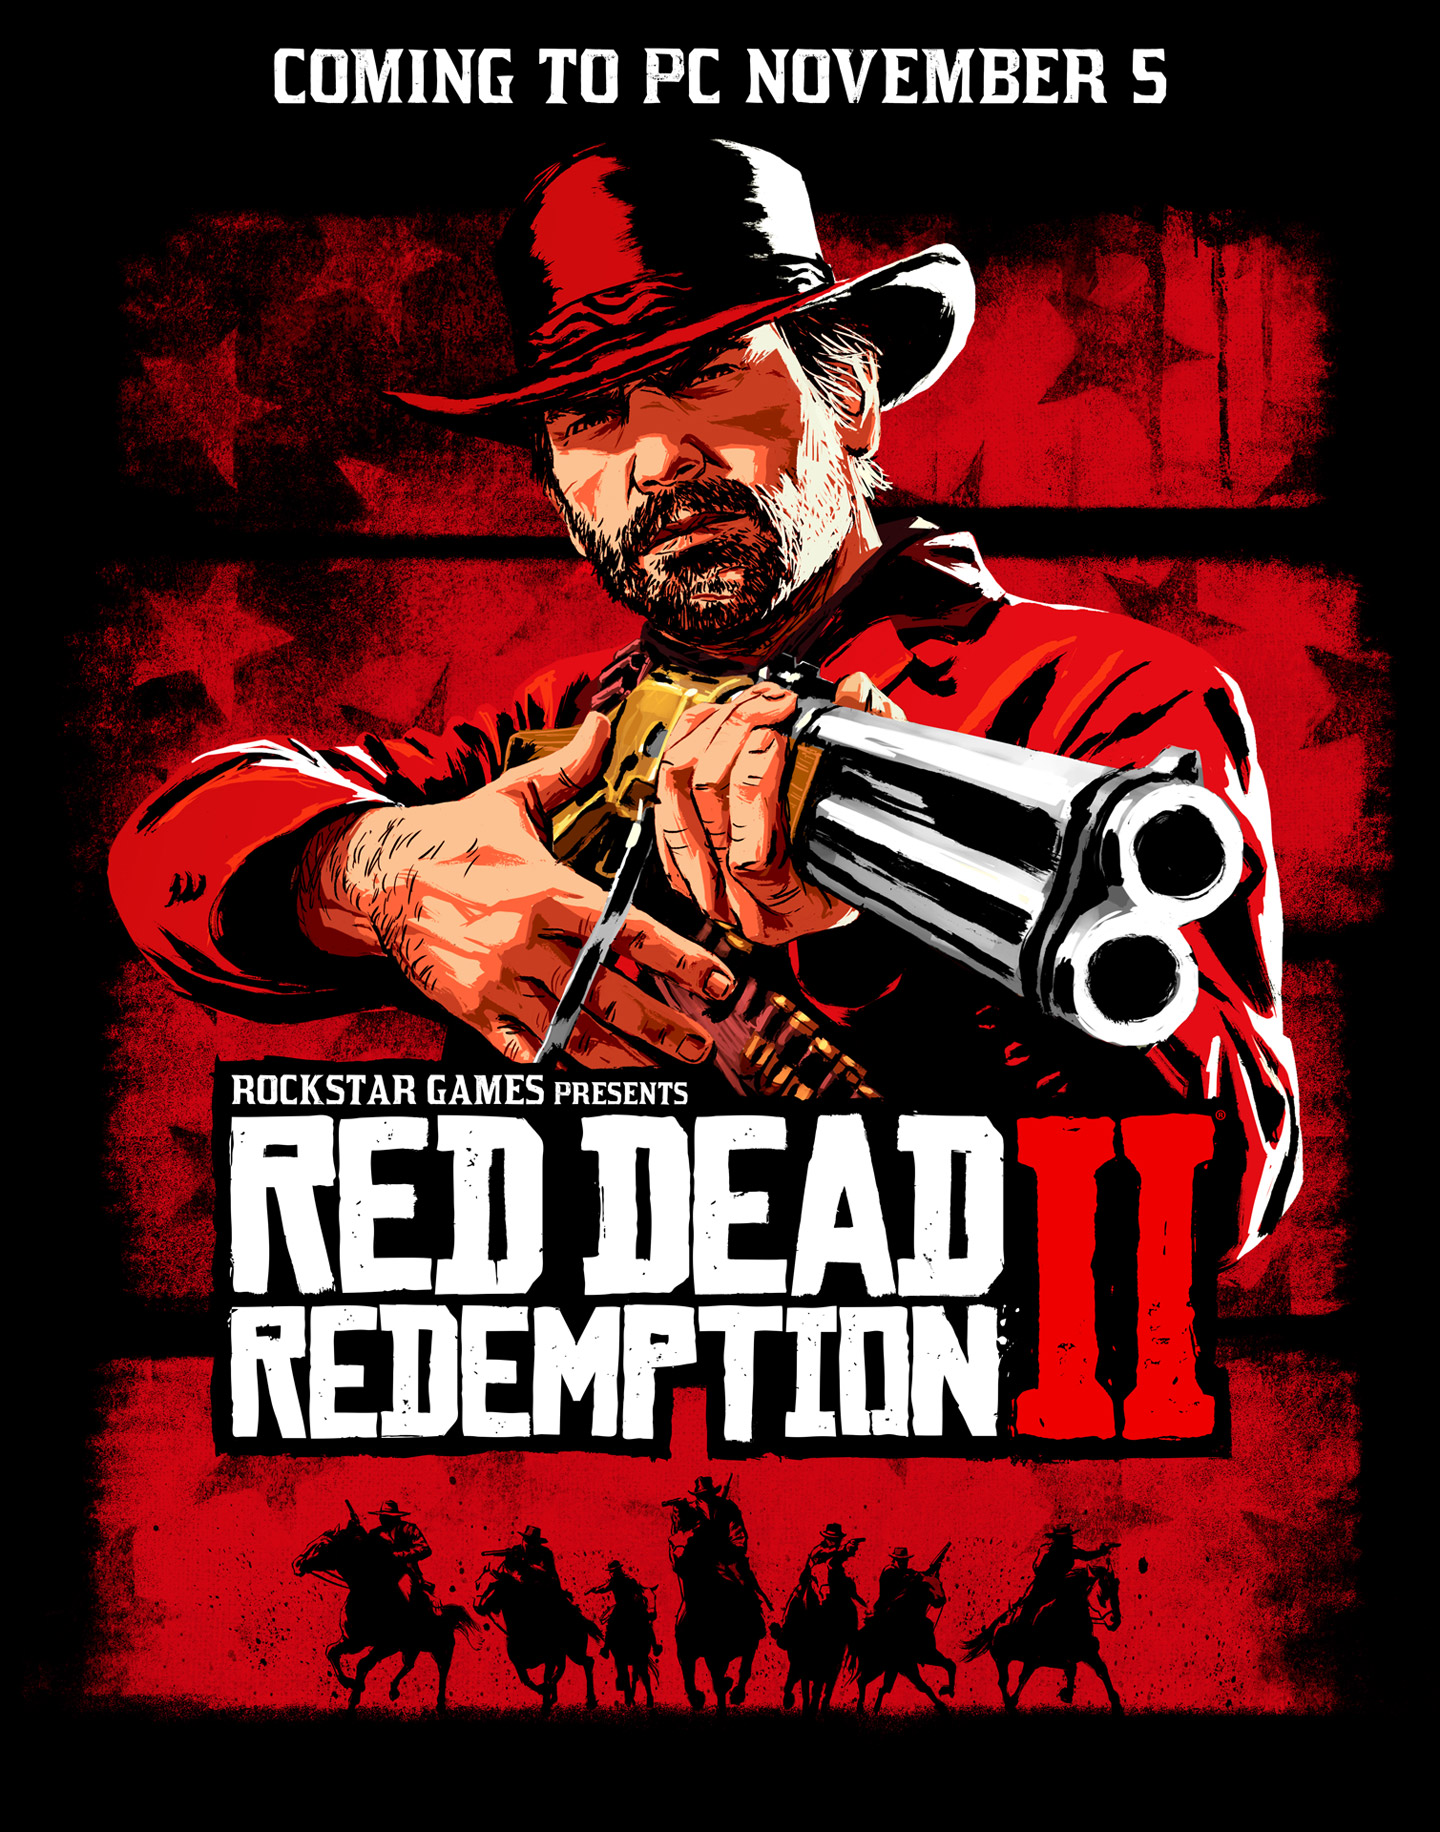 20191004-rdr2-coming-to-pc-poster.jpg